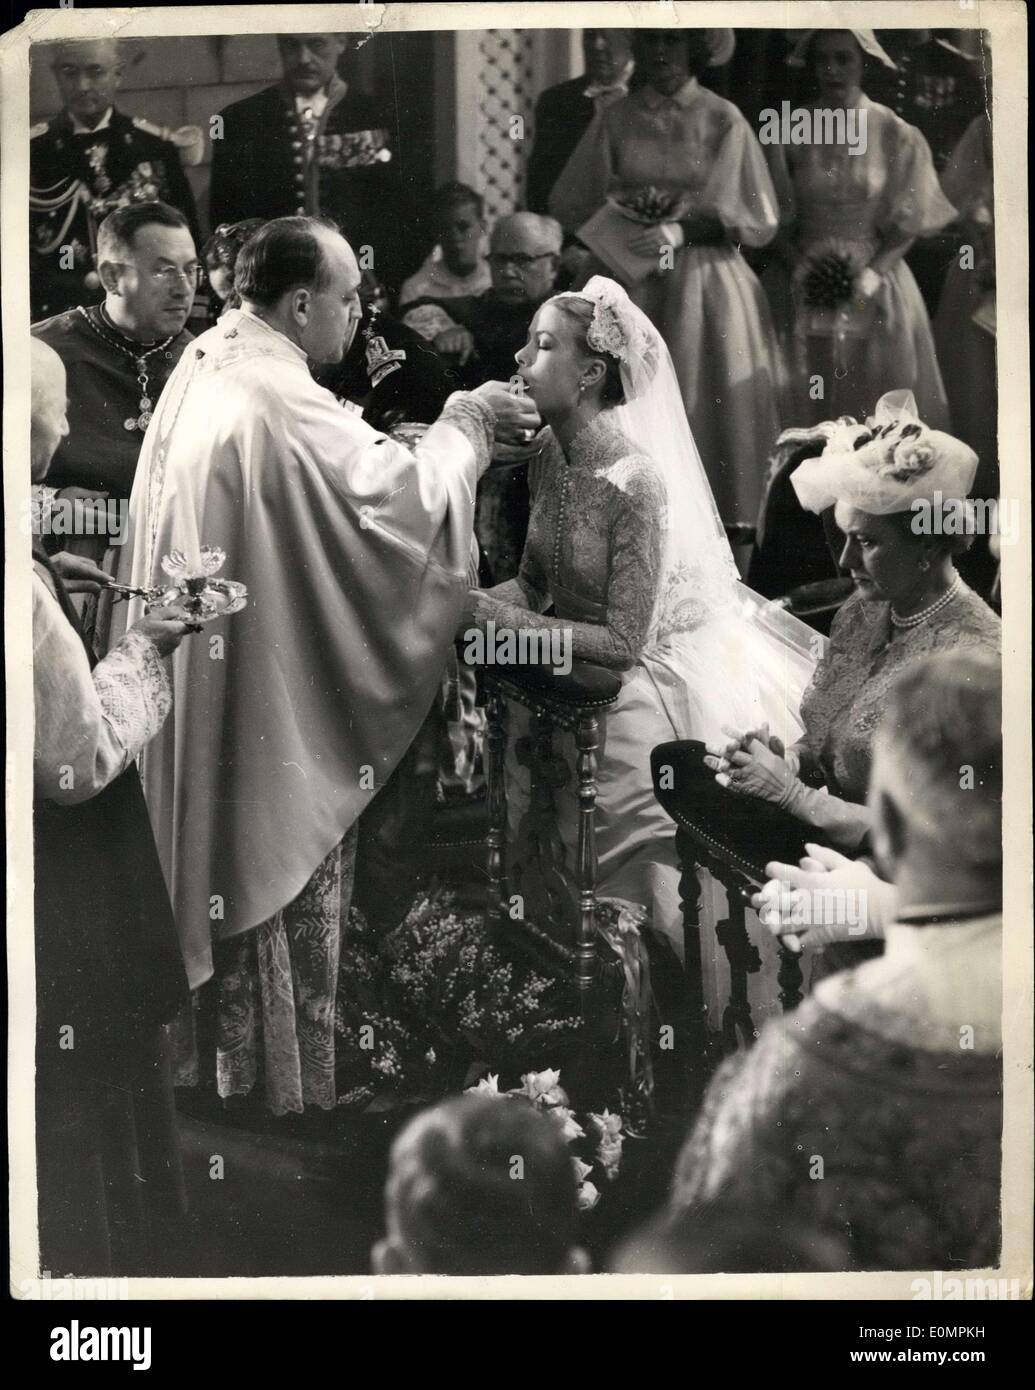 Apr. 19, 1956 - Prince Rainier and Grace Kelly Marry at Monaco Cathedral.: Photo shows Incident during the wedding ceremony of Prince Rainier and Grace Kelly at Monaco Cathedral today. Stock Photo